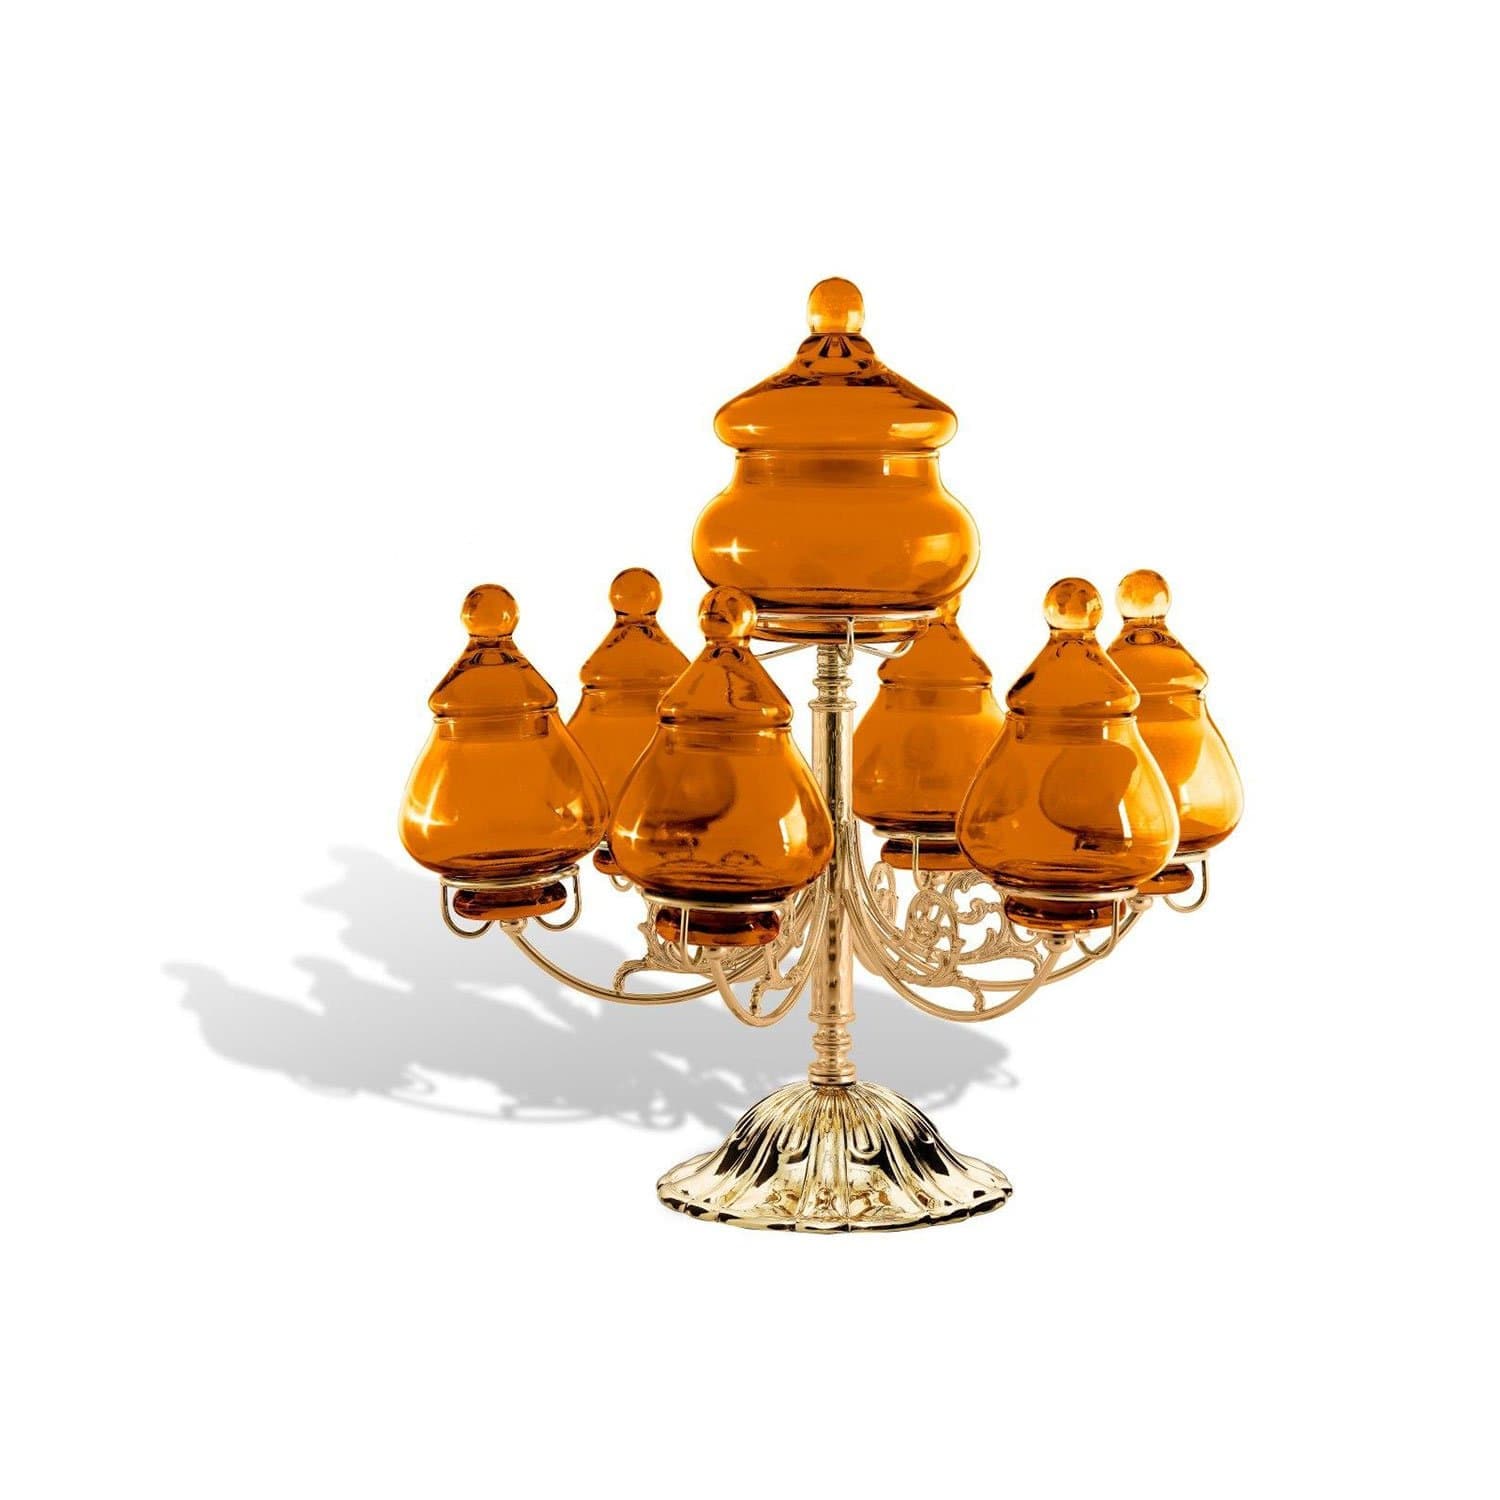 ROMA CENTERPIECE 7 BOXES GLASS AMBER - DC6152/OR-AM